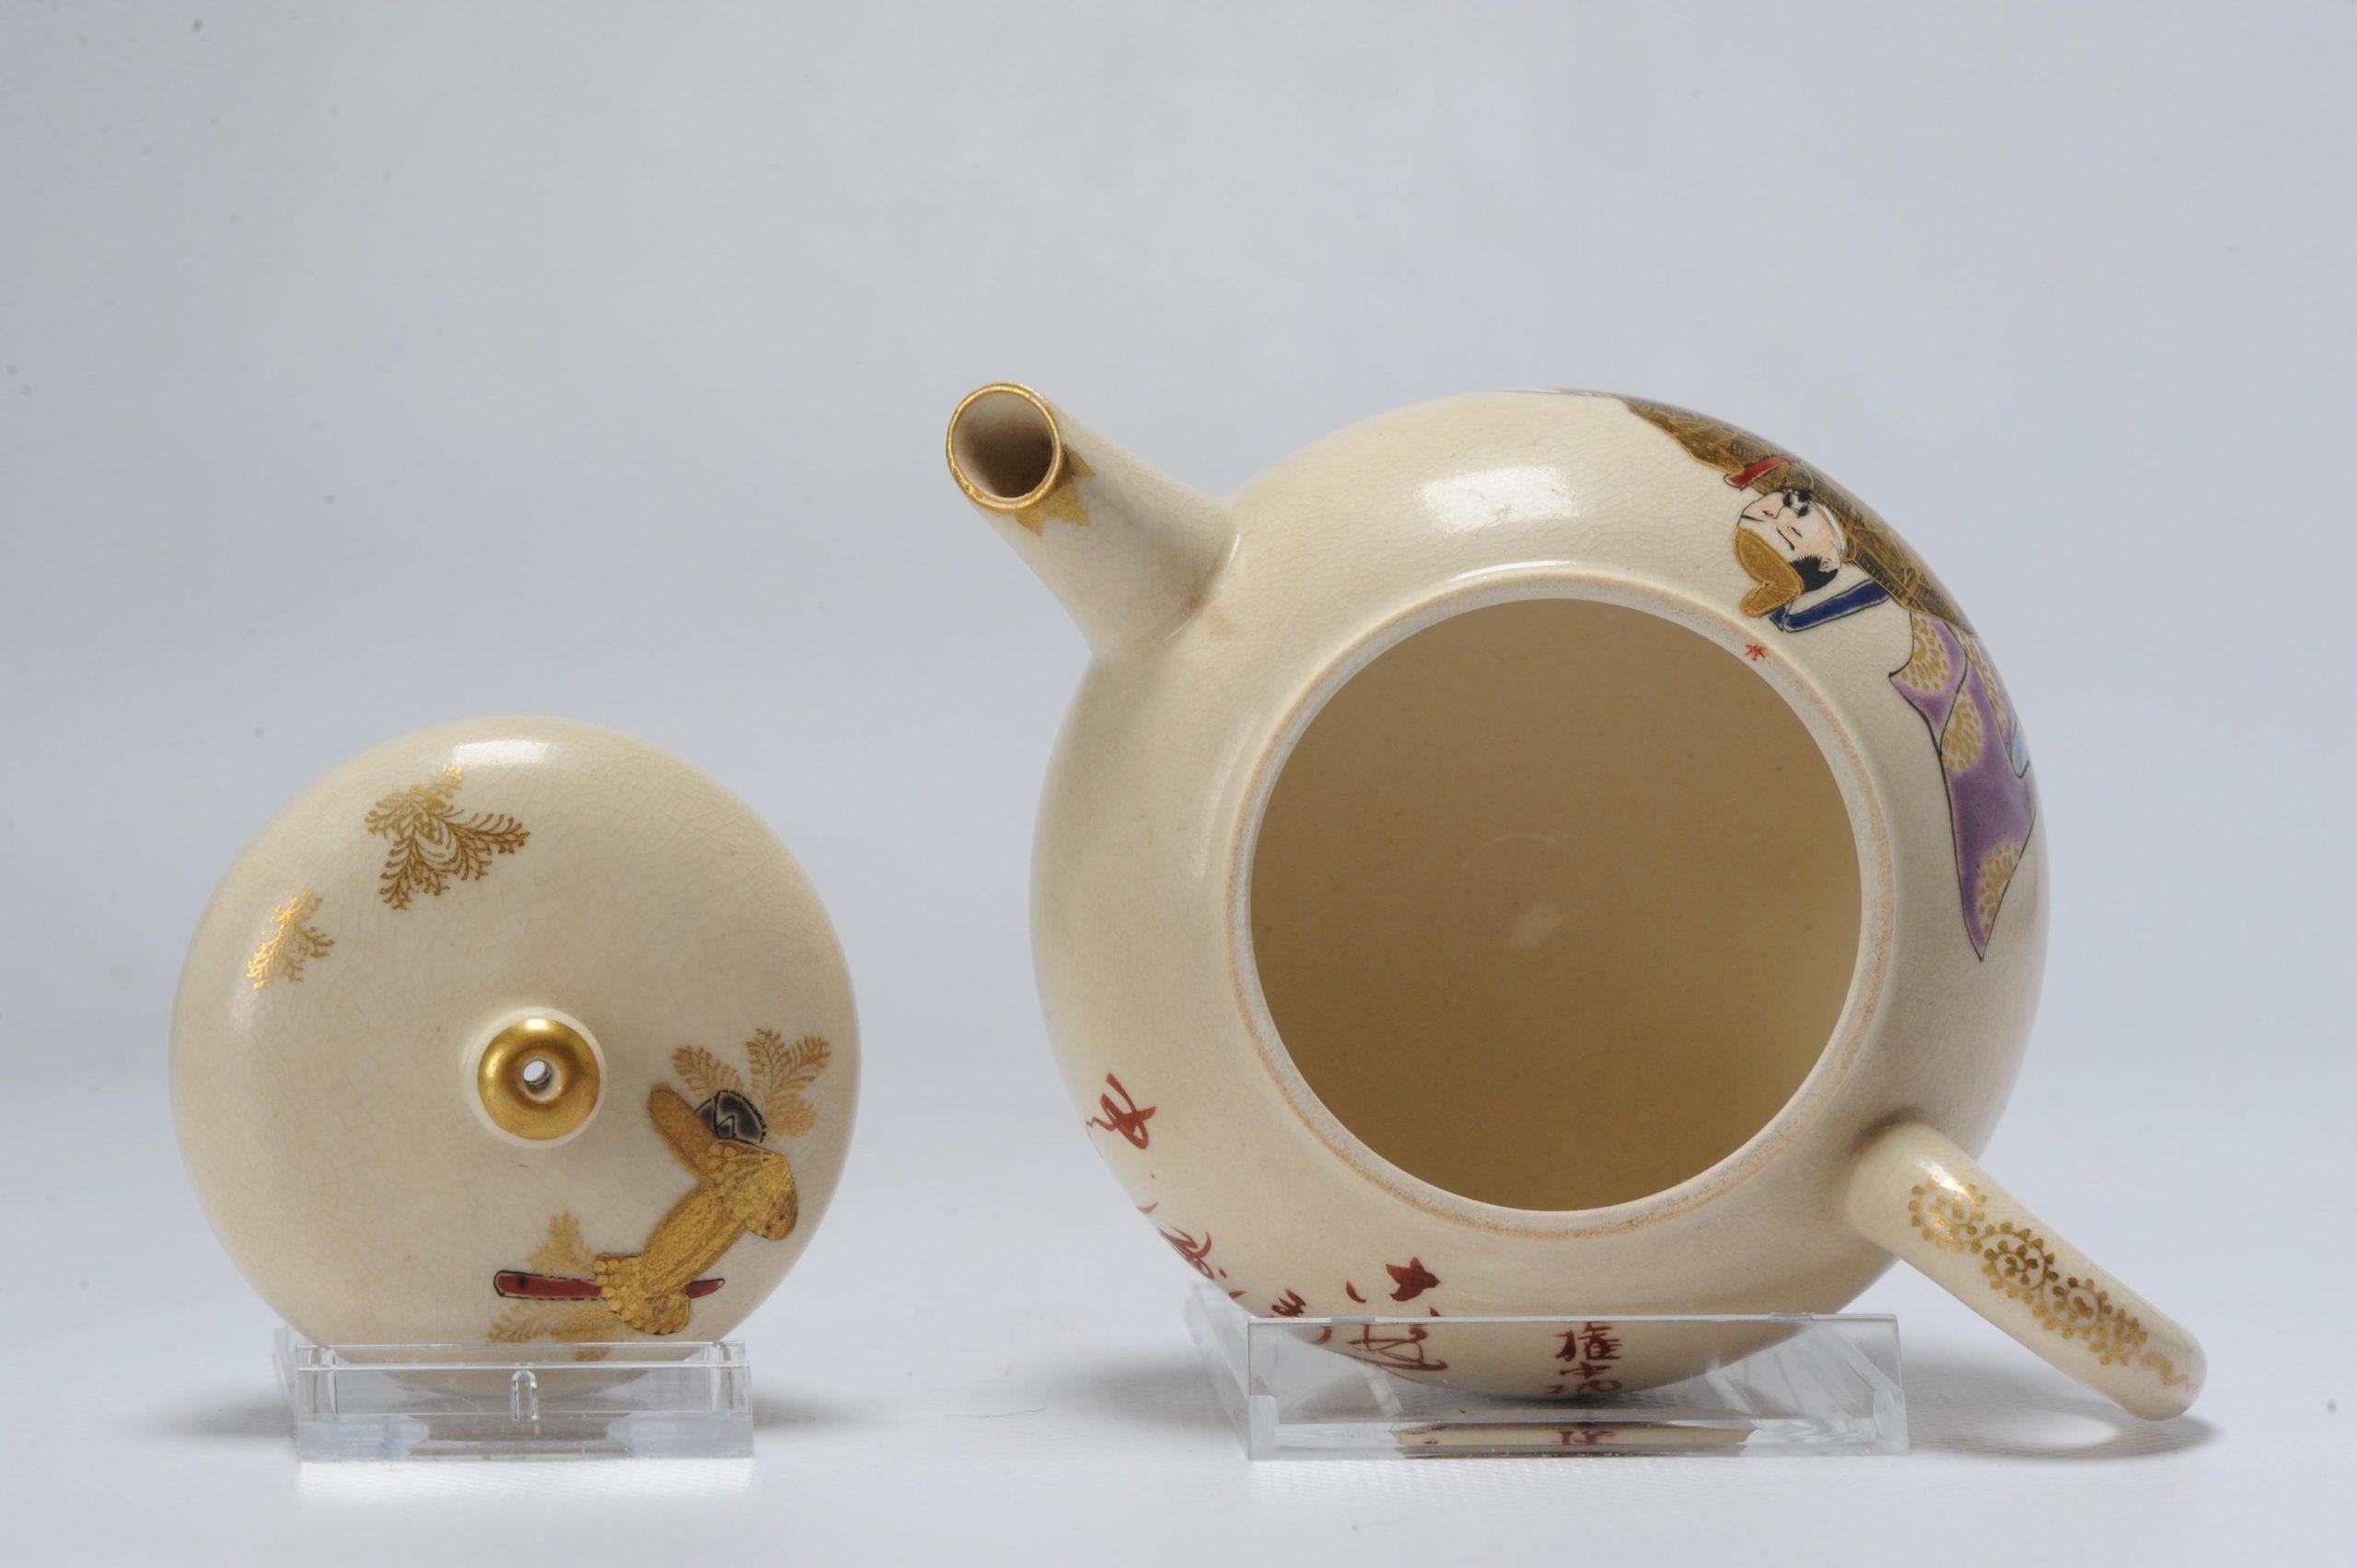 Japanese Antique Signed Satsuma Teapot Fujiware no Teika, Late 19th/Early 20th Century For Sale